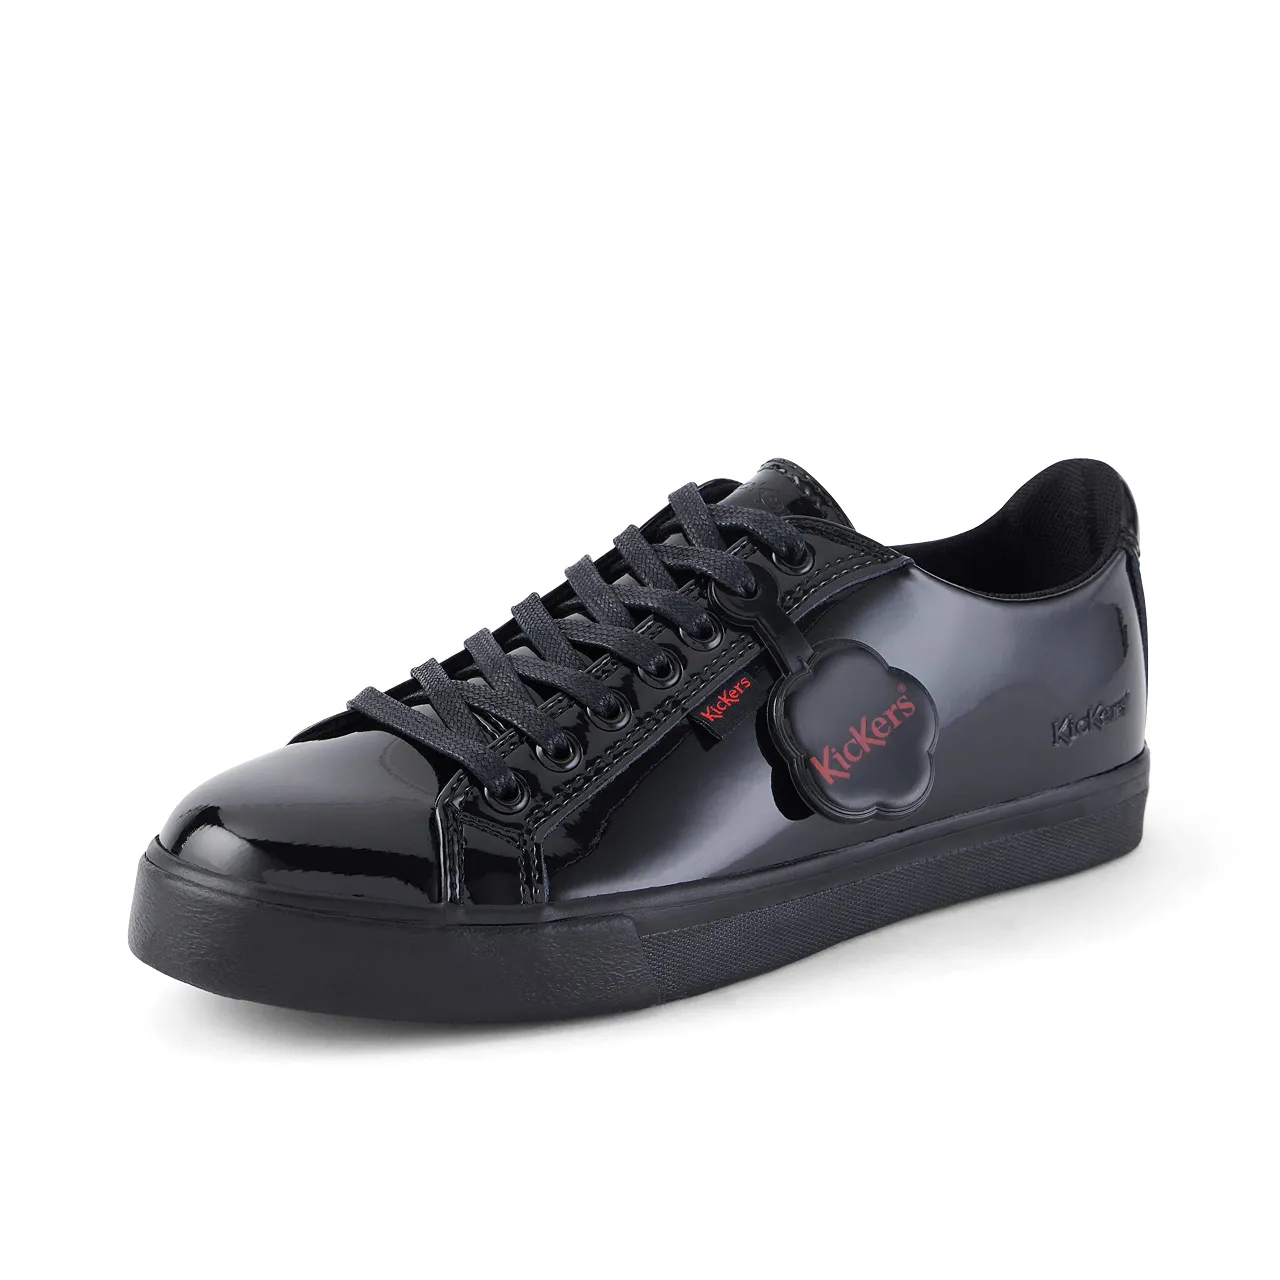 Kickers Youth Girl's Tovni Lacer Patent Leather Trainer